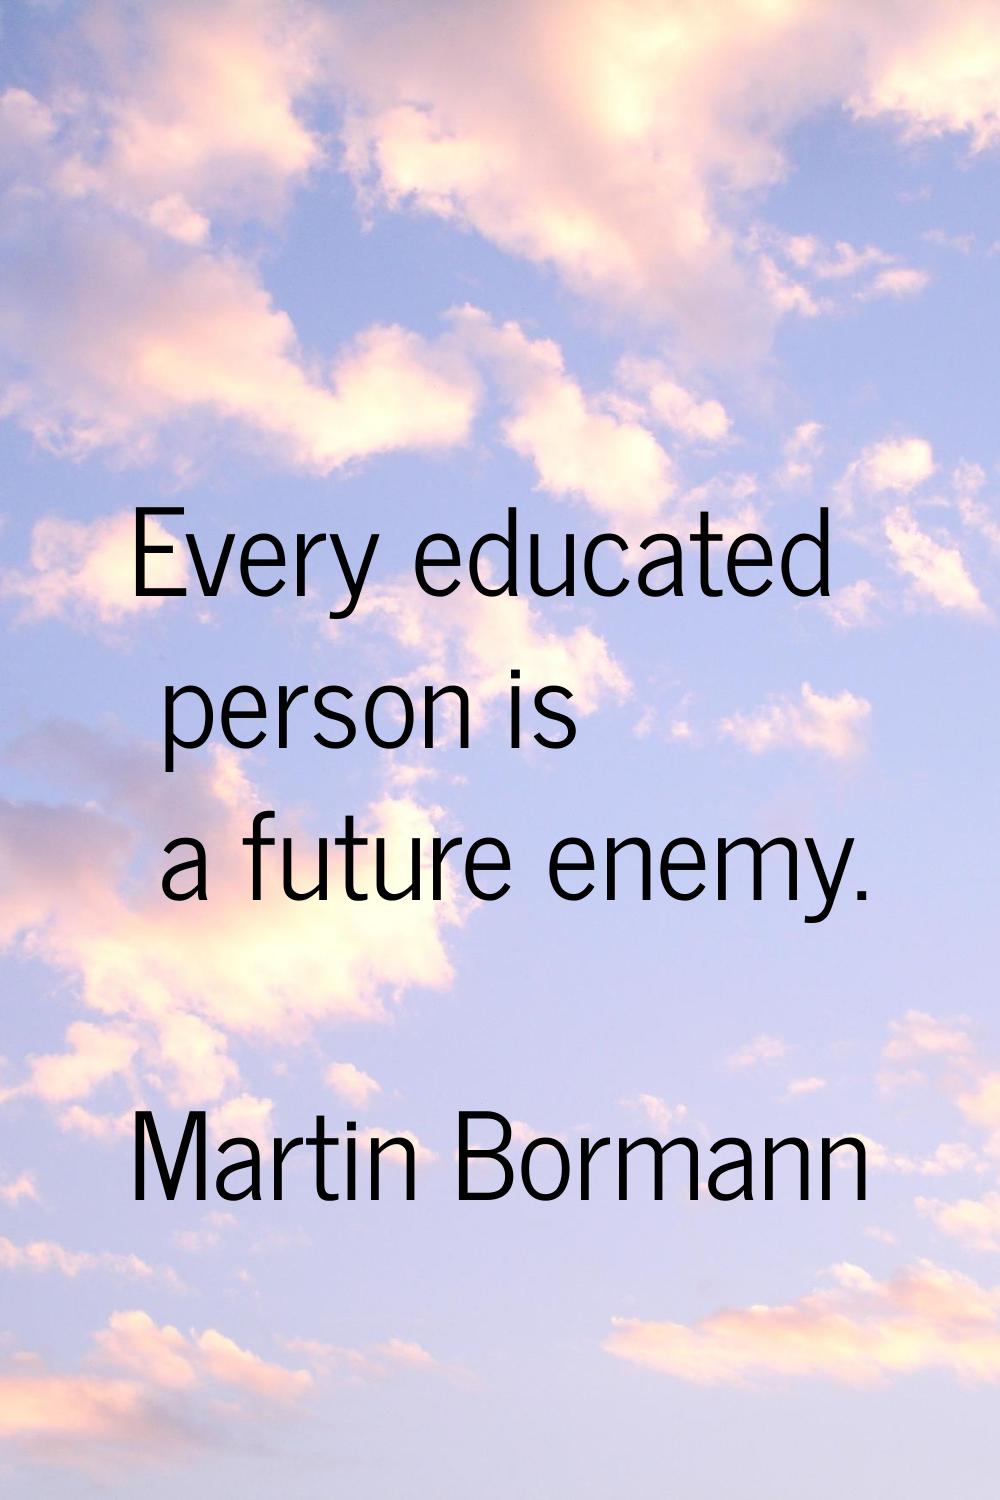 Every educated person is a future enemy.